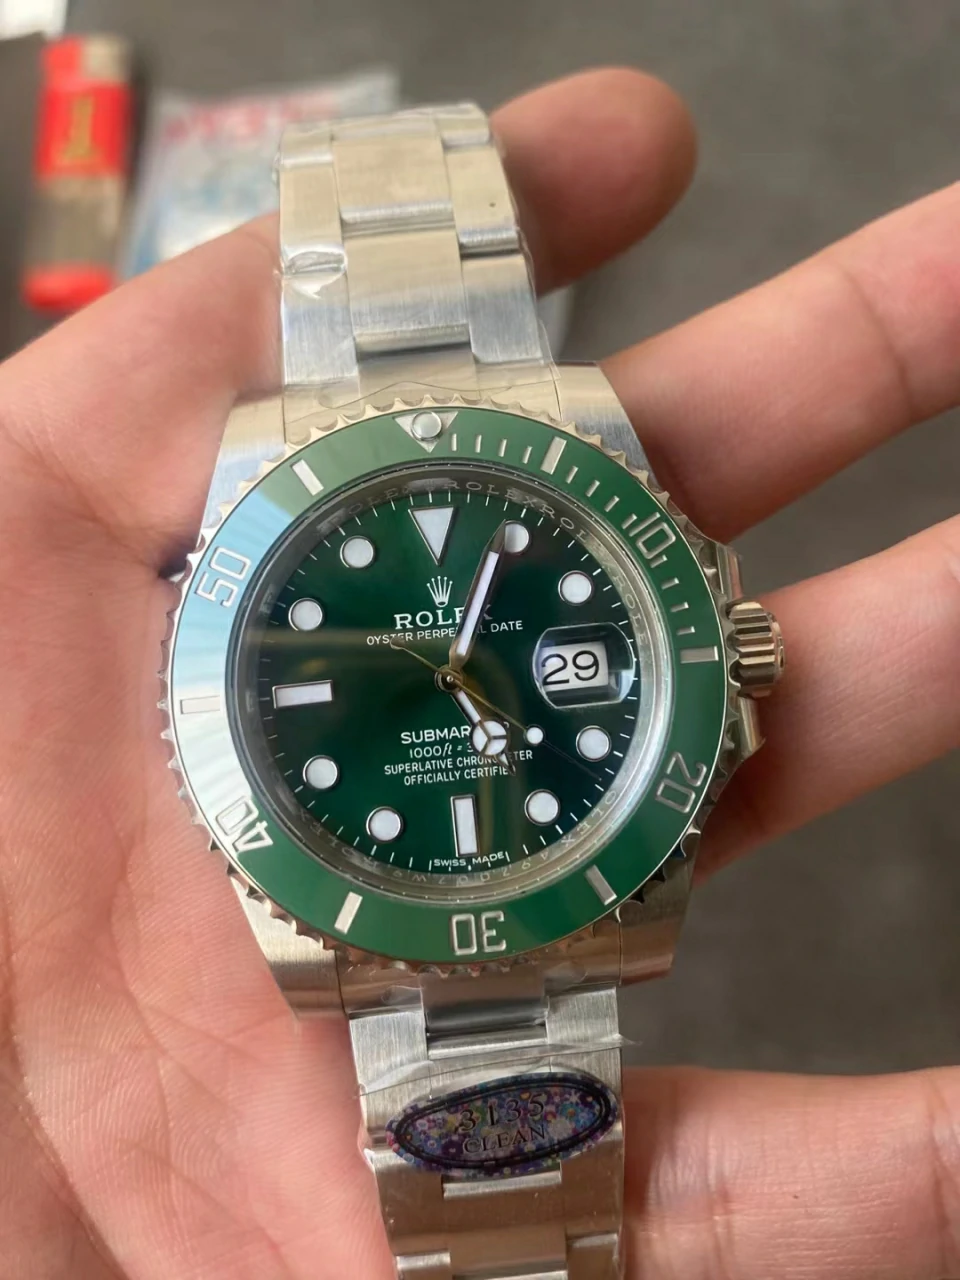 Rolex Submariner Date 116610 LV SS 904L Green Dial Clone 3135 Clean Factory